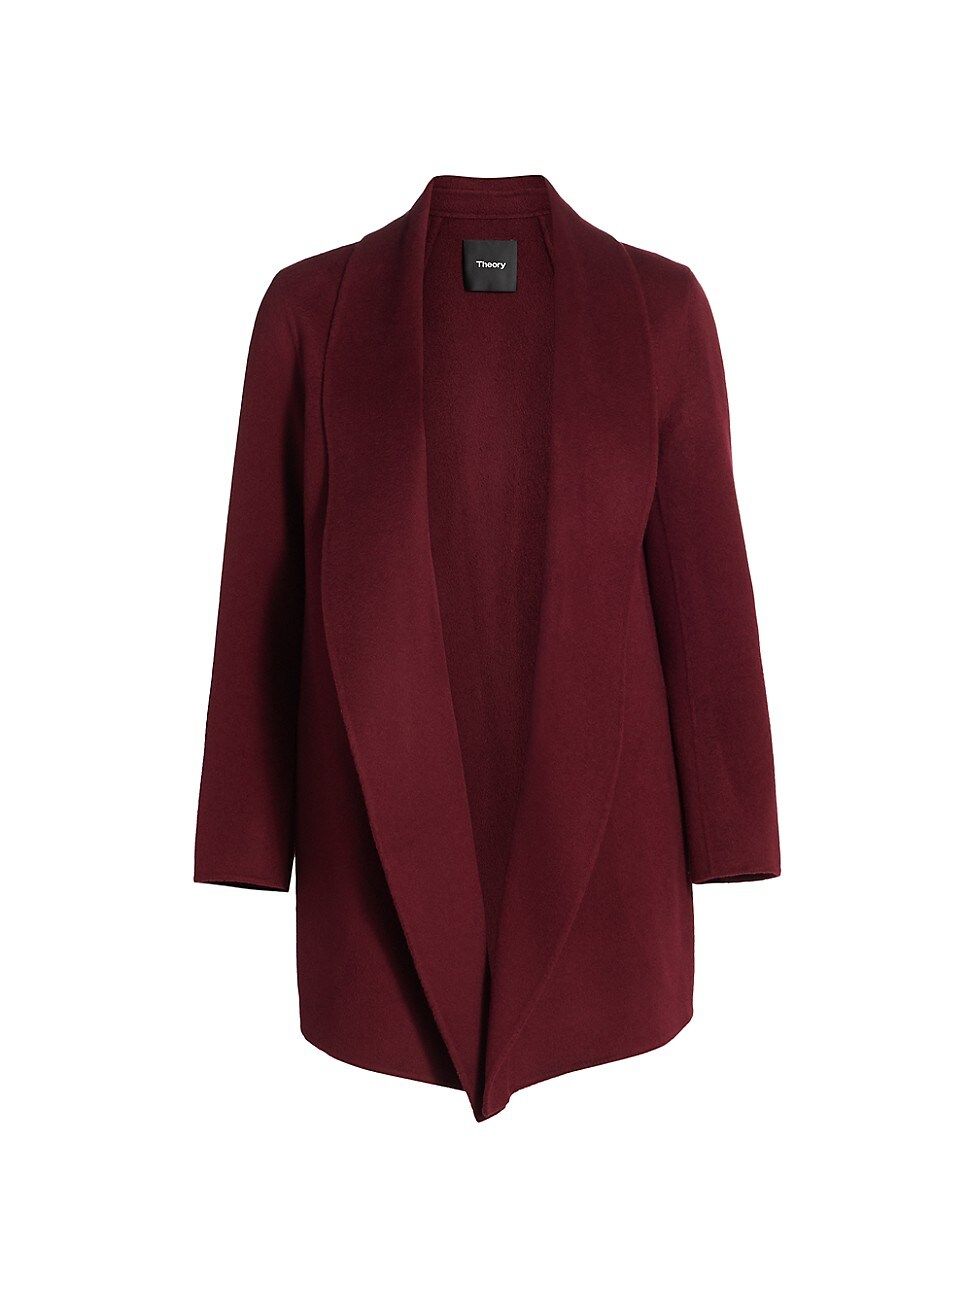 Theory Women's Clairene Shawl Collar Jacket - Currant - Size XL | Saks Fifth Avenue